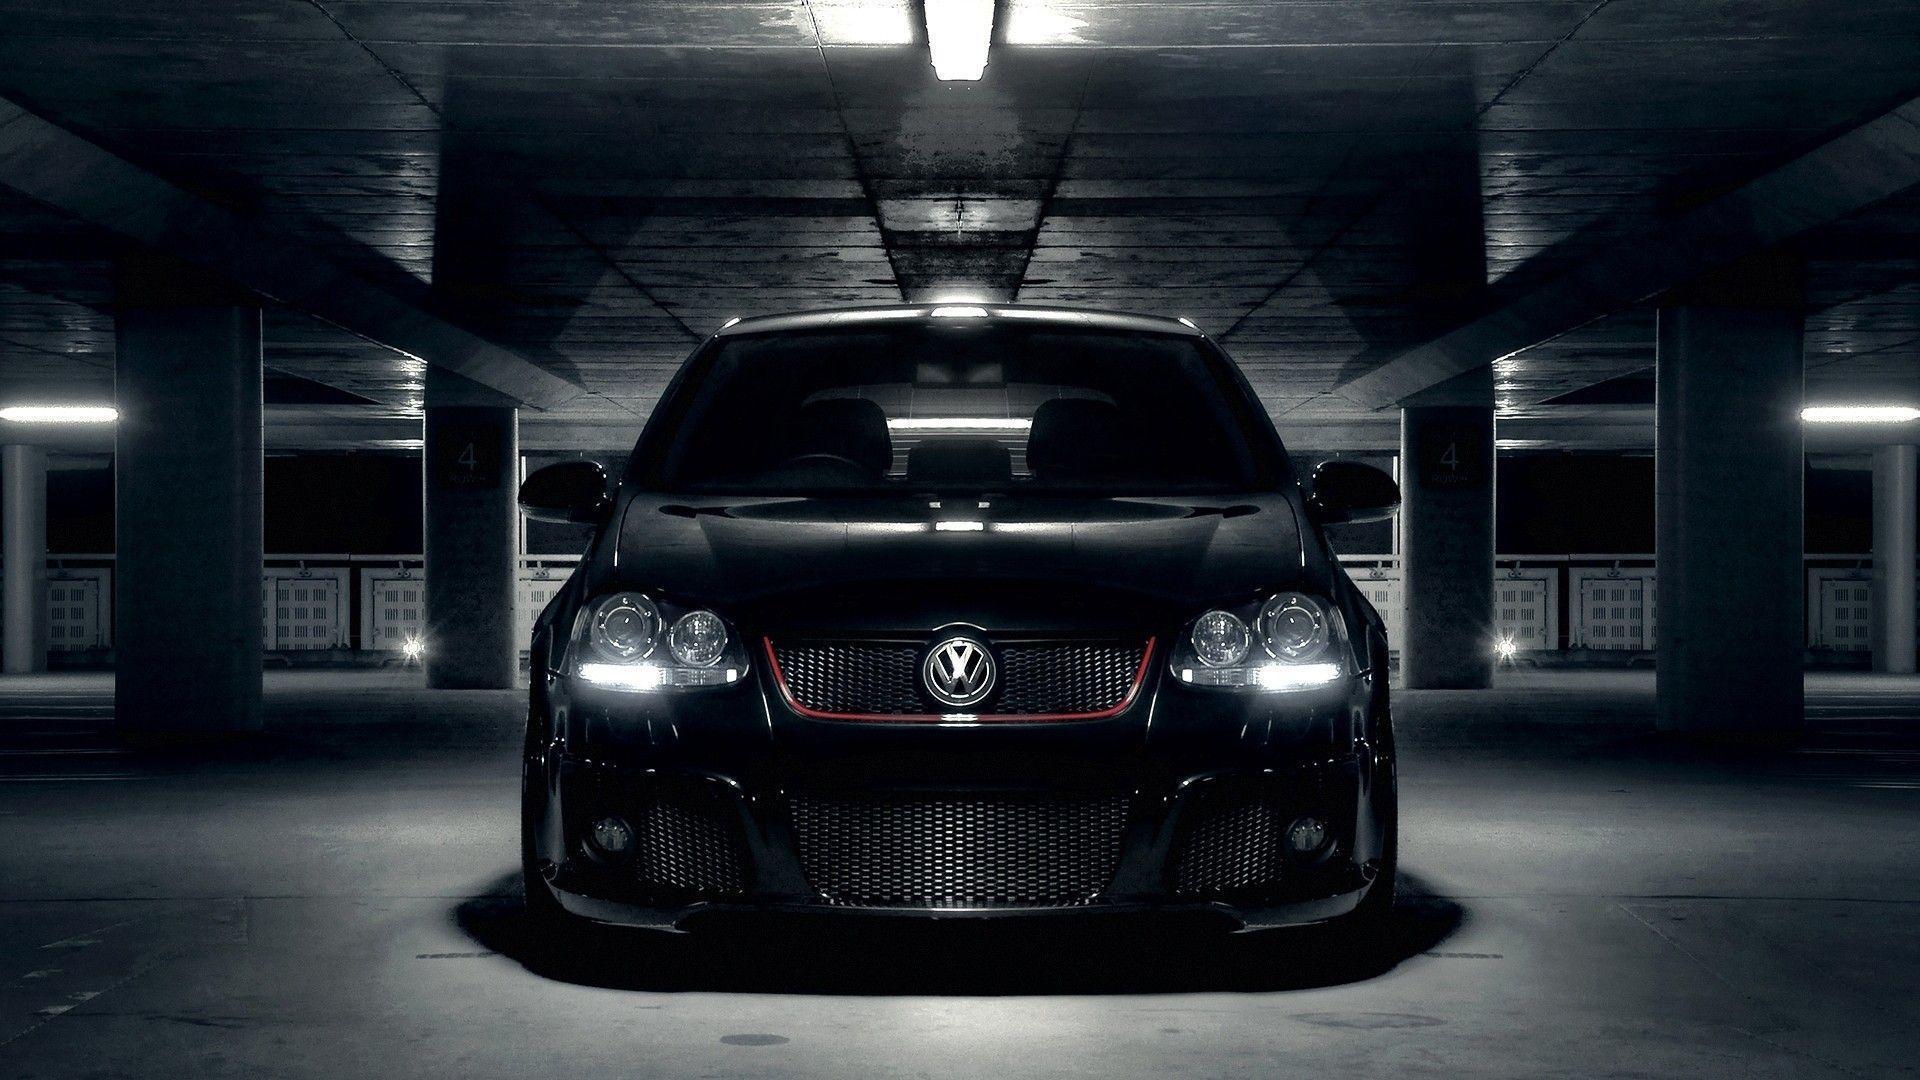 VW Golf GTI picture for desktop and wallpaper